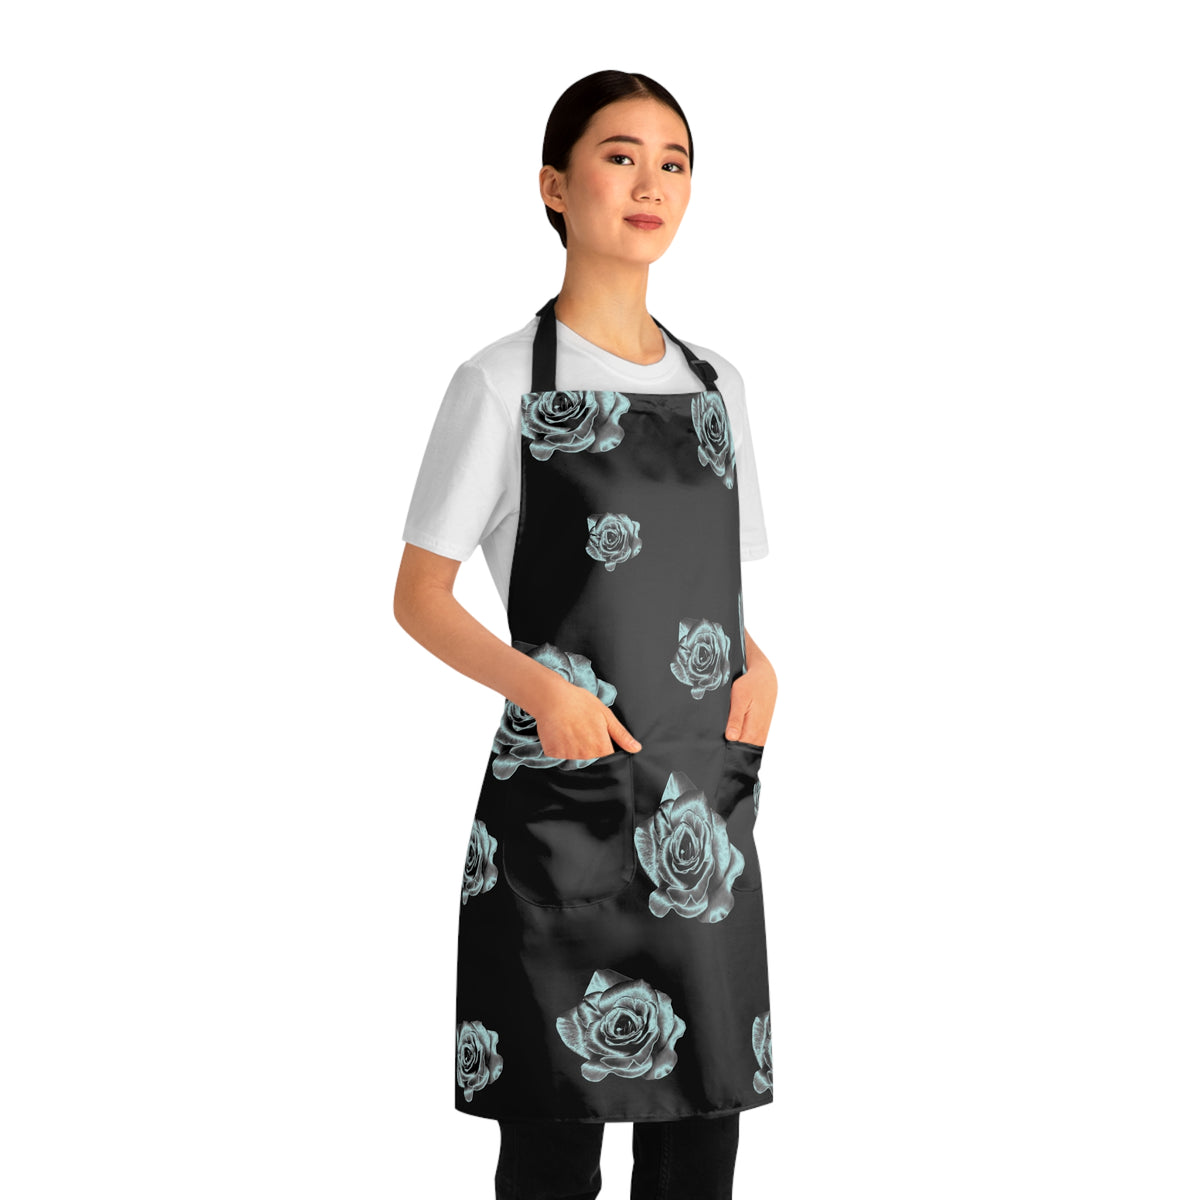 side view of girl wearing a grilling apron with a black and silver rose pattern on it and black straps with both hands in apron pockets